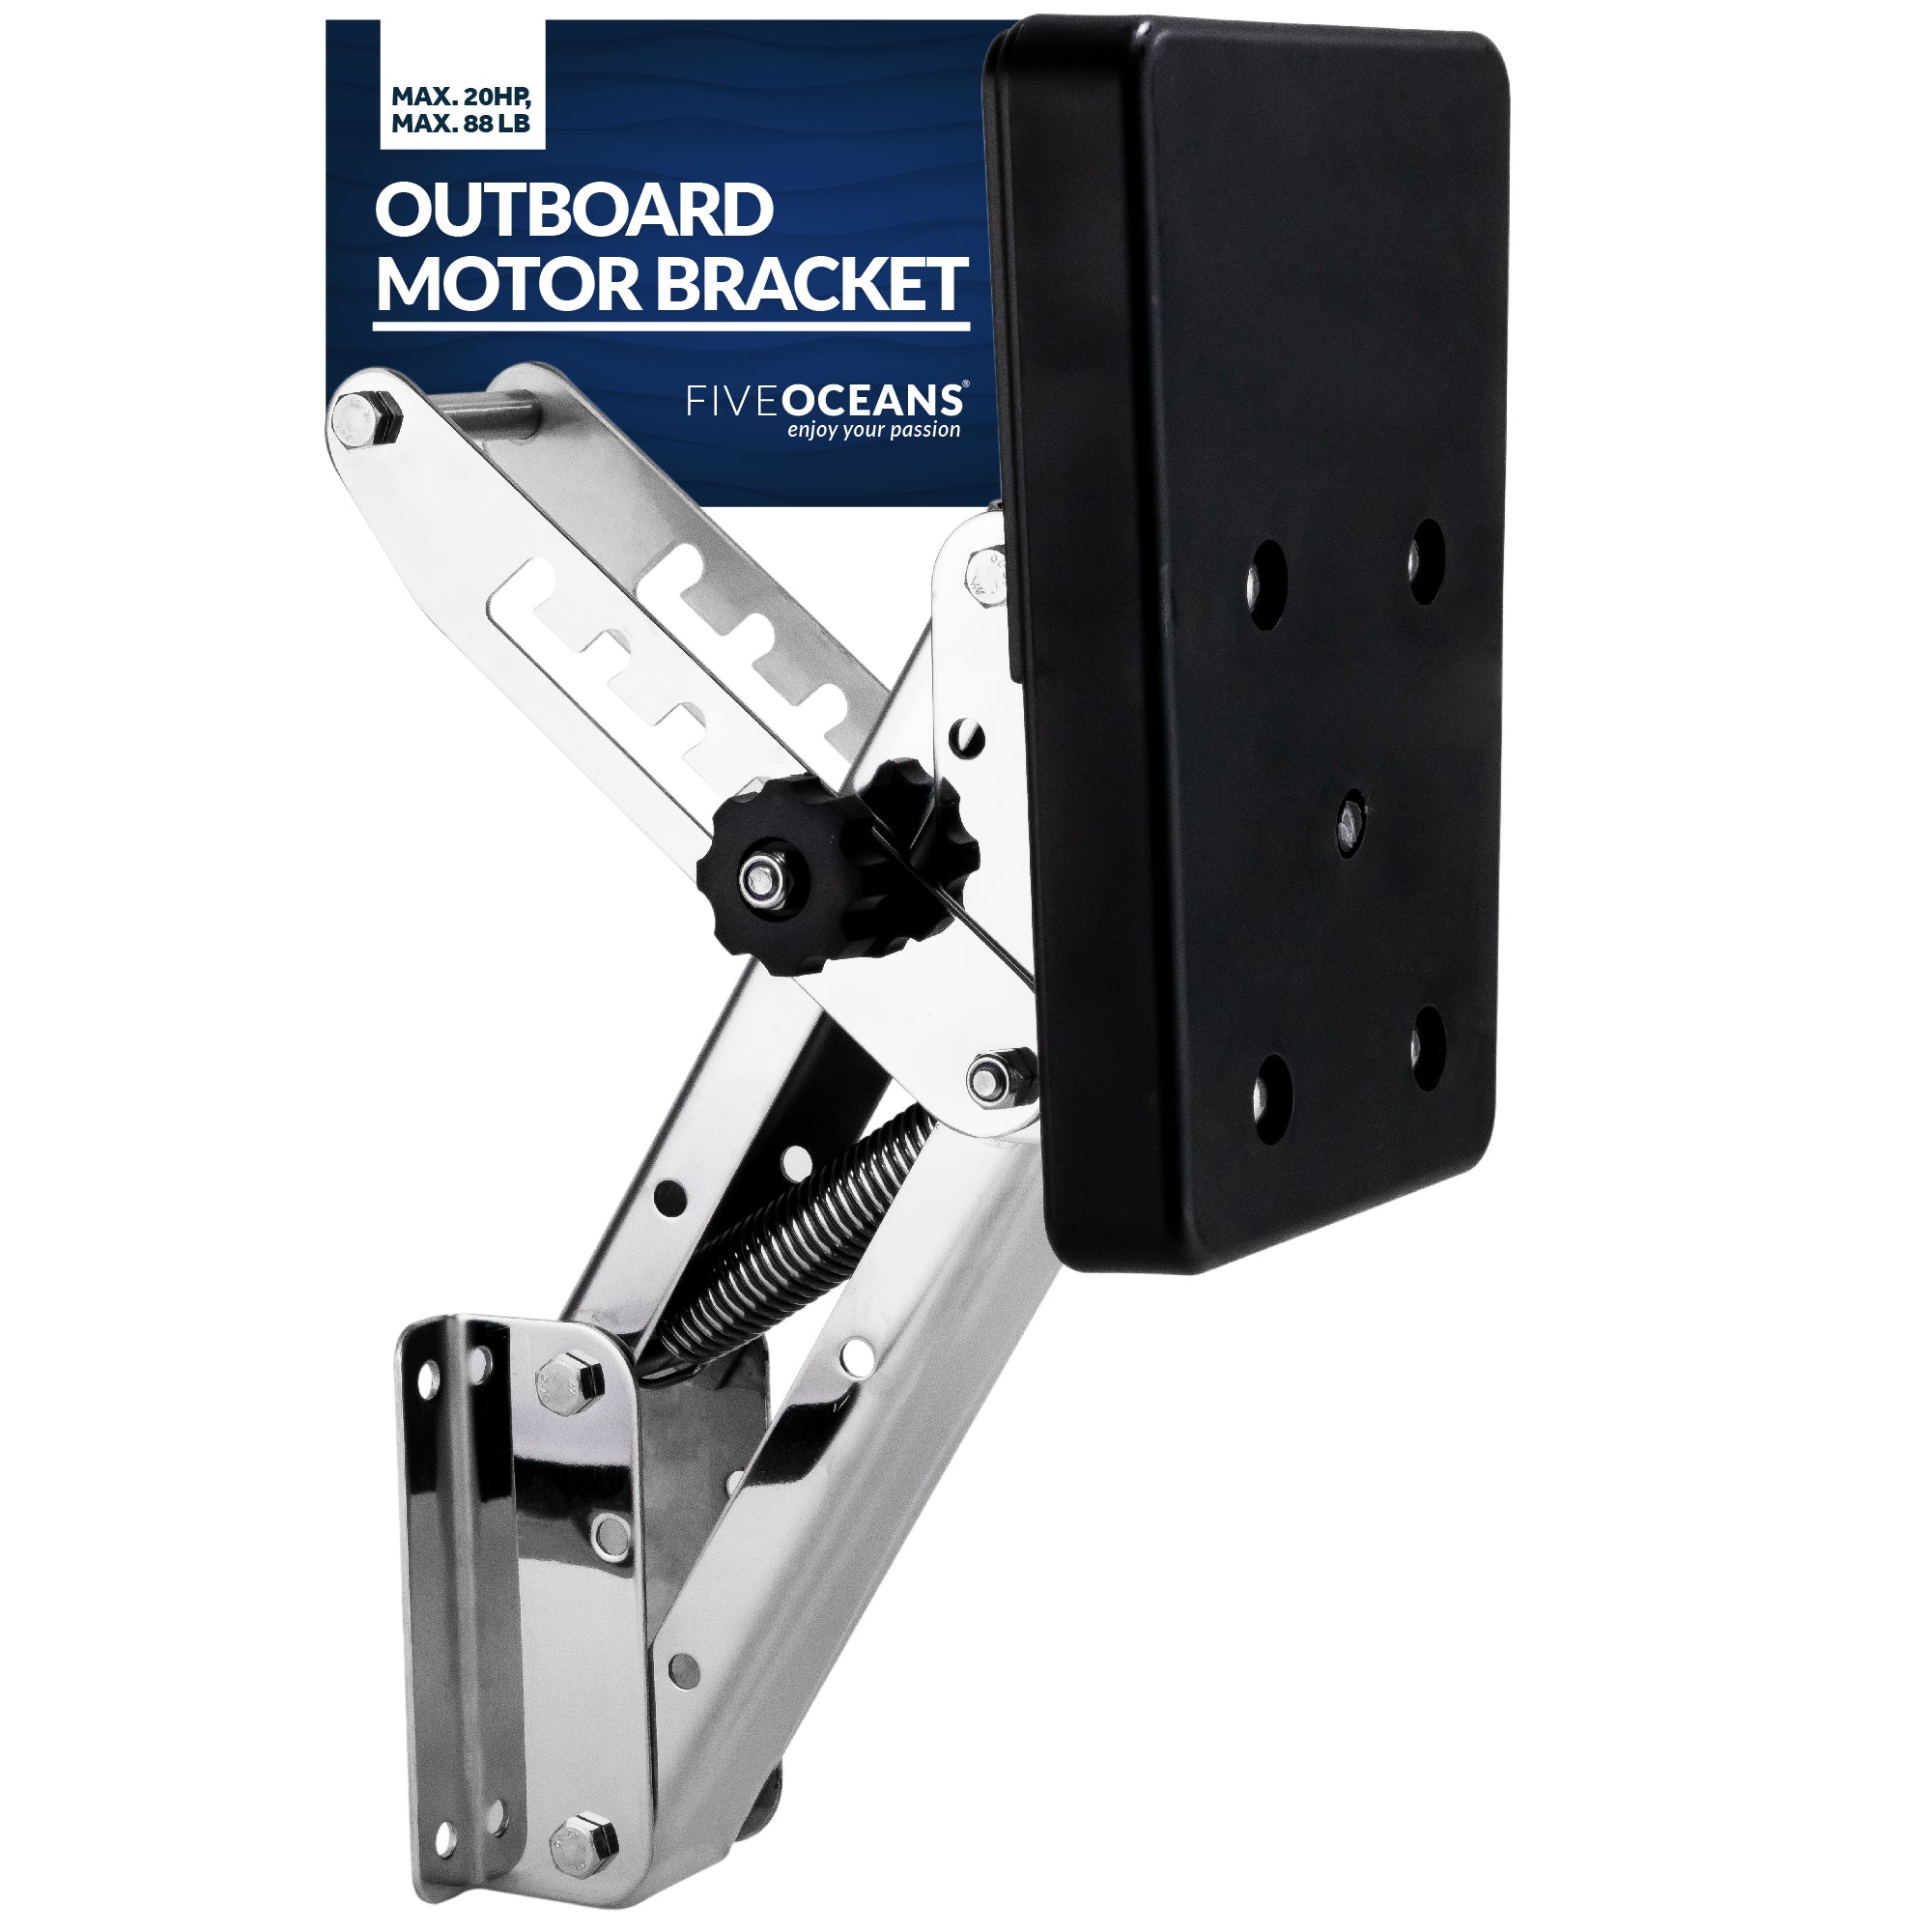 Adjustable Outboard Motor Bracket, Max. 20 Hp, Max. 88 Lb, 11-Inch of Travel, 316 Stainless Steel, Black Board - FO4204